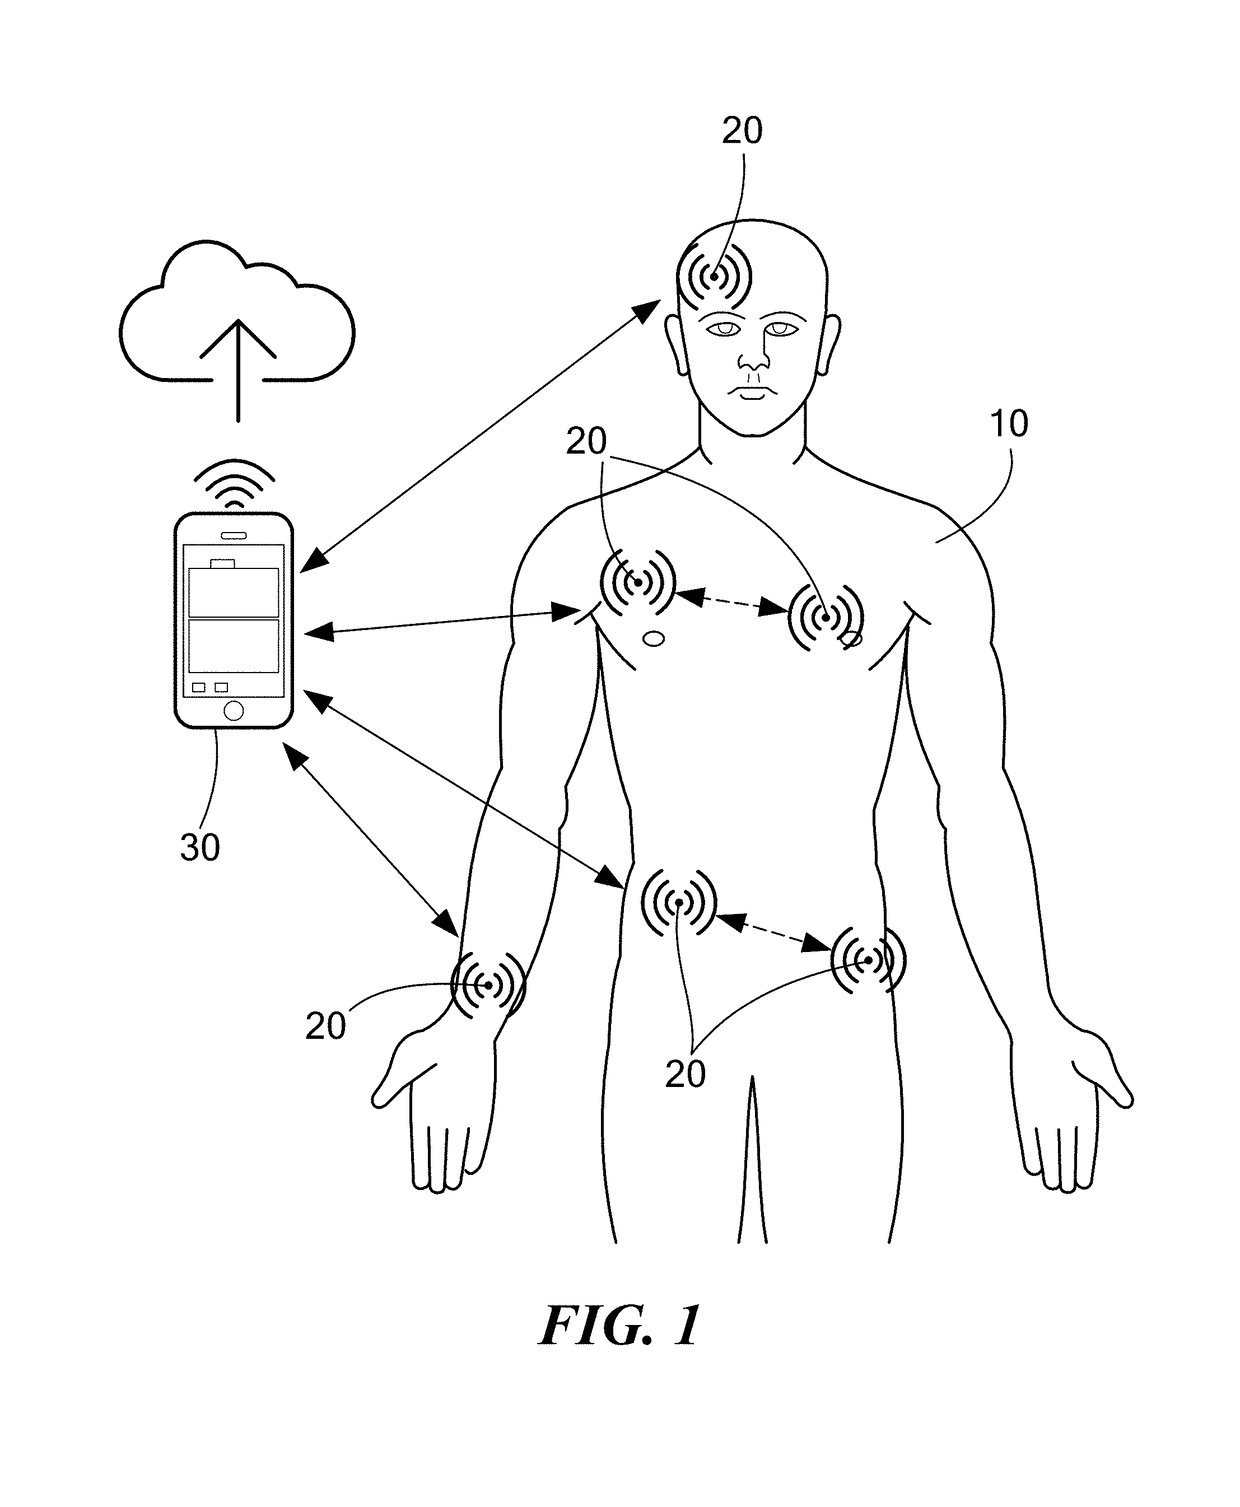 Ultrasonic Network for Wearable Devices